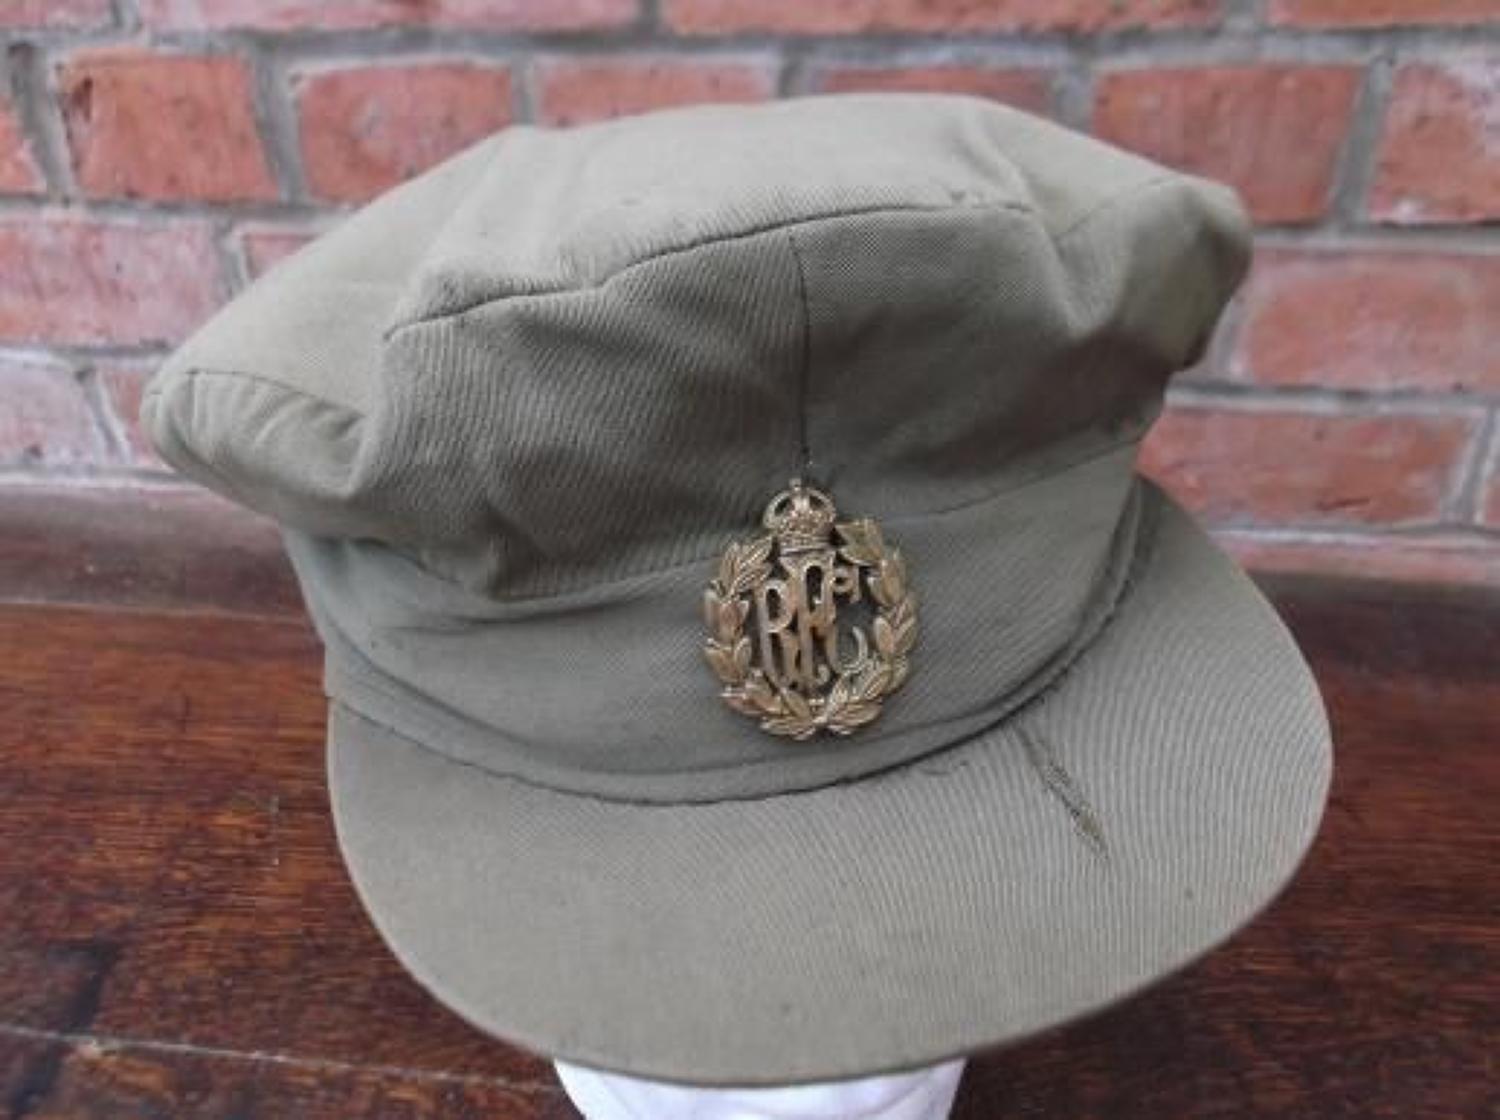 RFC WW1 BRITISH OFFICERS FLOPPY STYLE TRENCH CAP